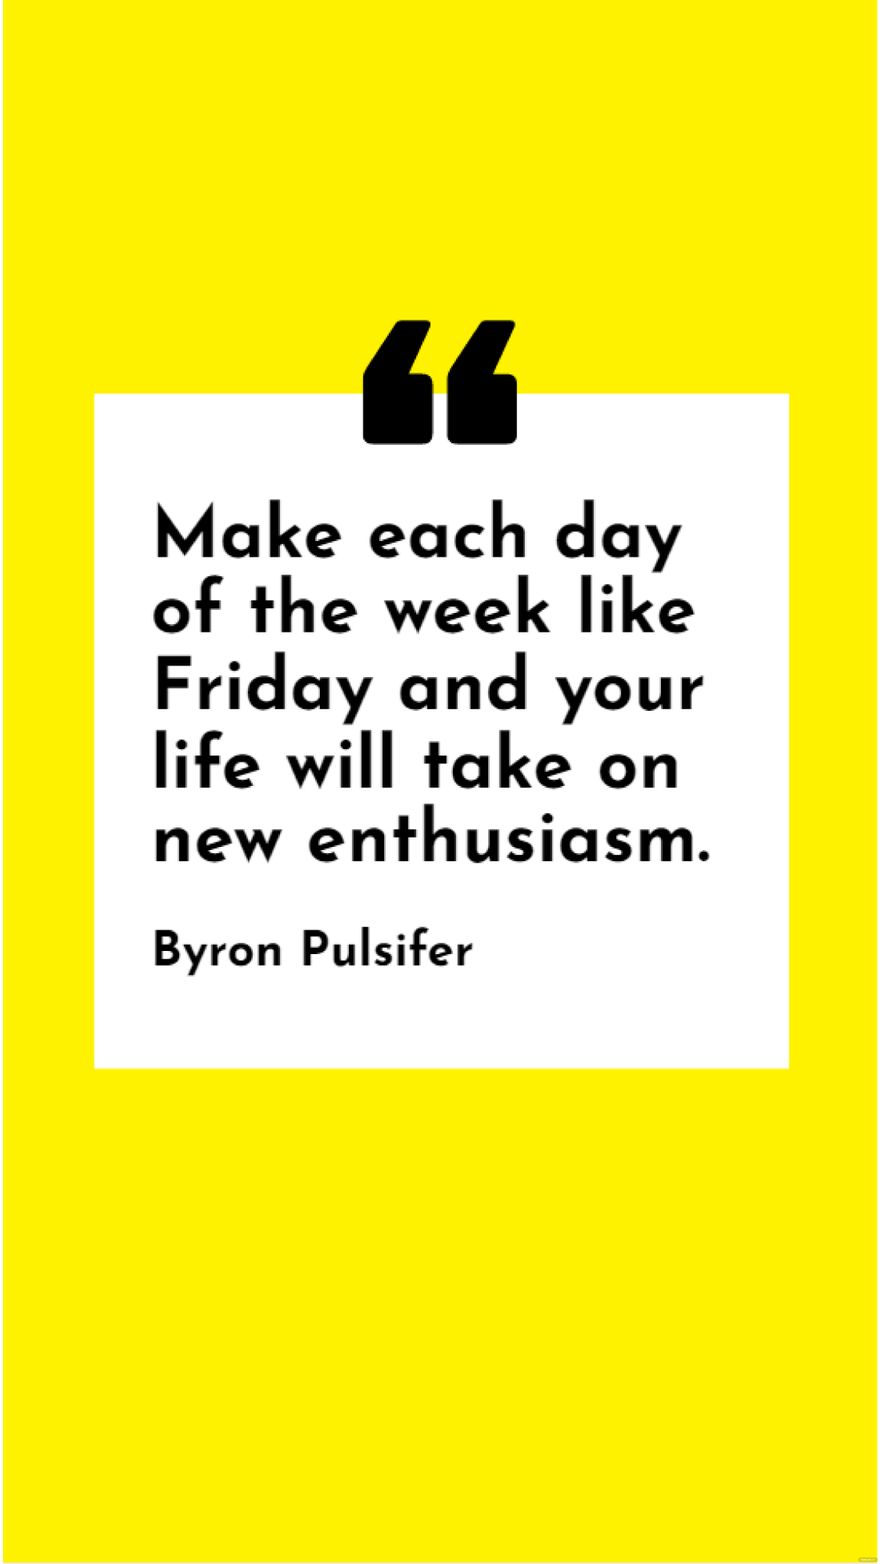 Byron Pulsifer - Make each day of the week like Friday and your life will take on new enthusiasm. 